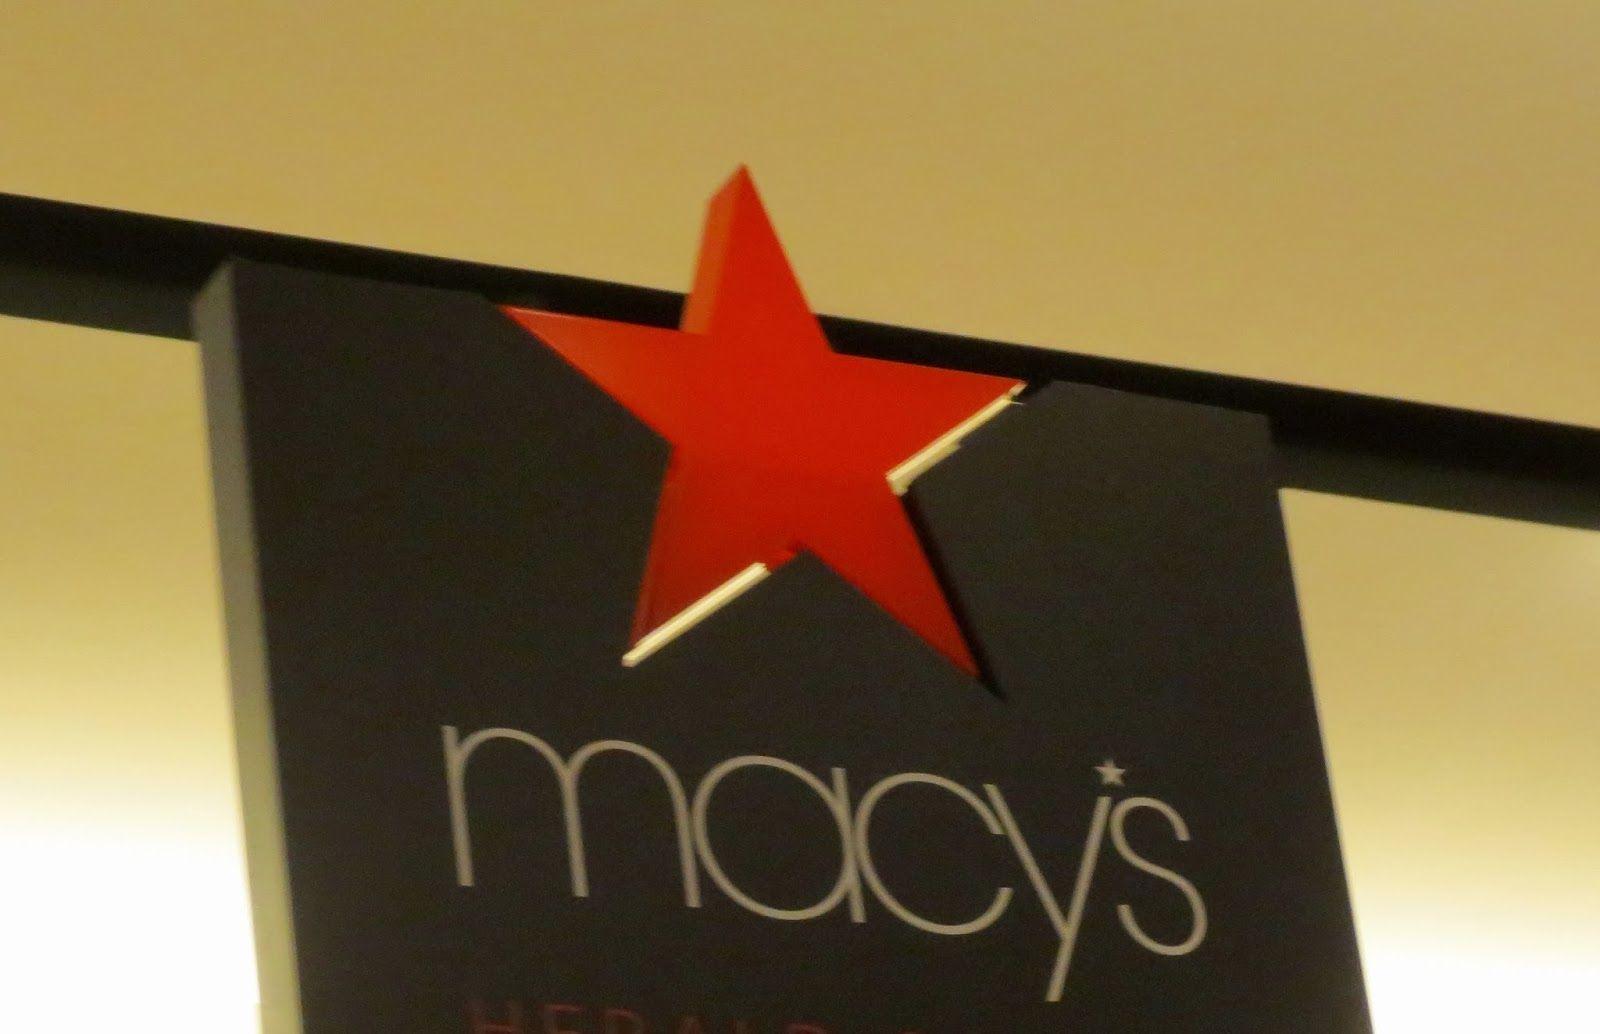 Macy's Star Logo - Big Apple Secrets: The Magic of Macy's. The history of the store. Part 1